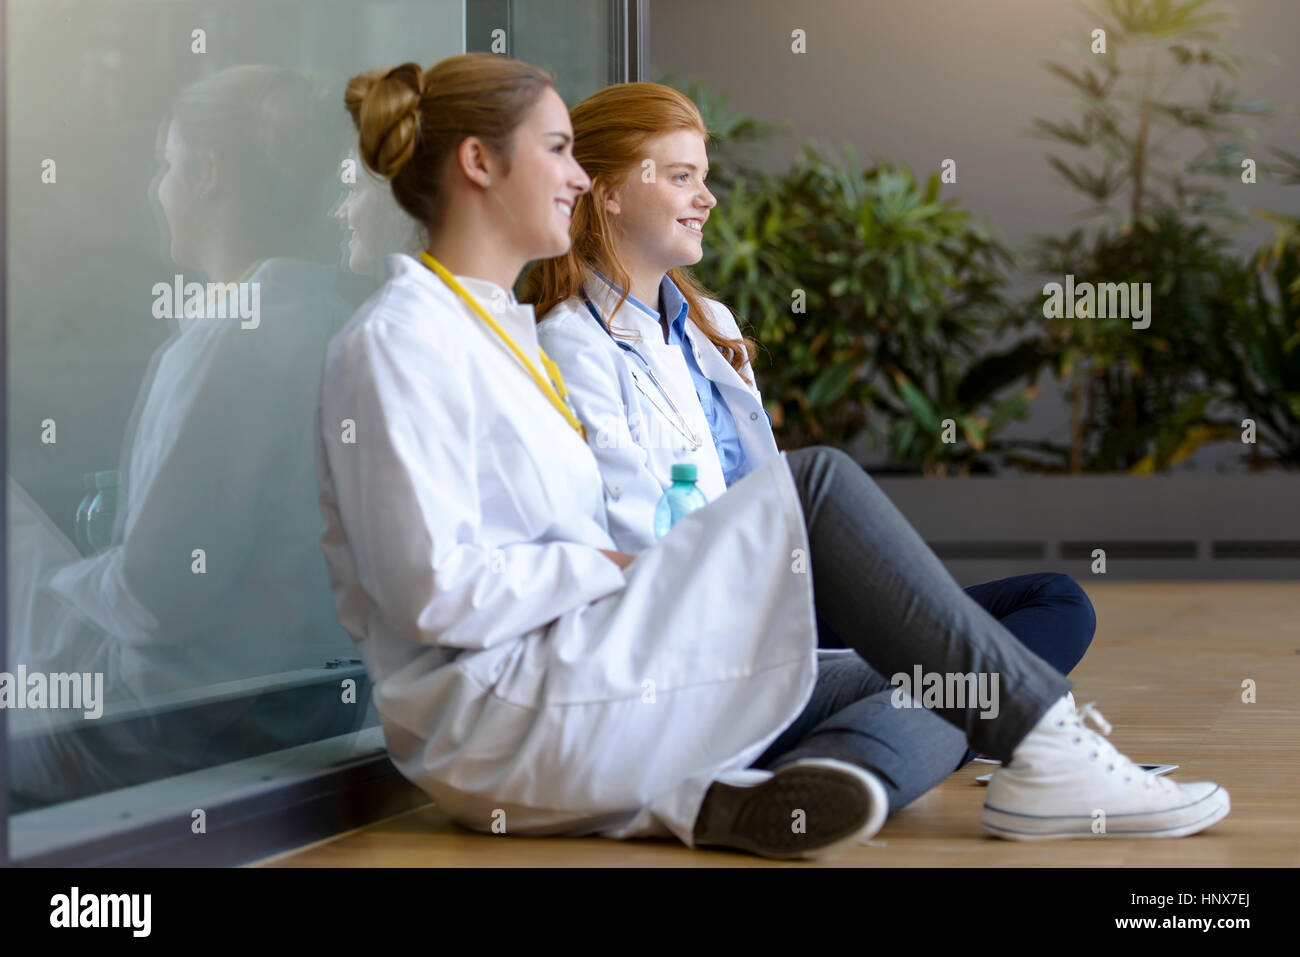 Two young female doctors sitting on floor at hospital entrance Stock Photo